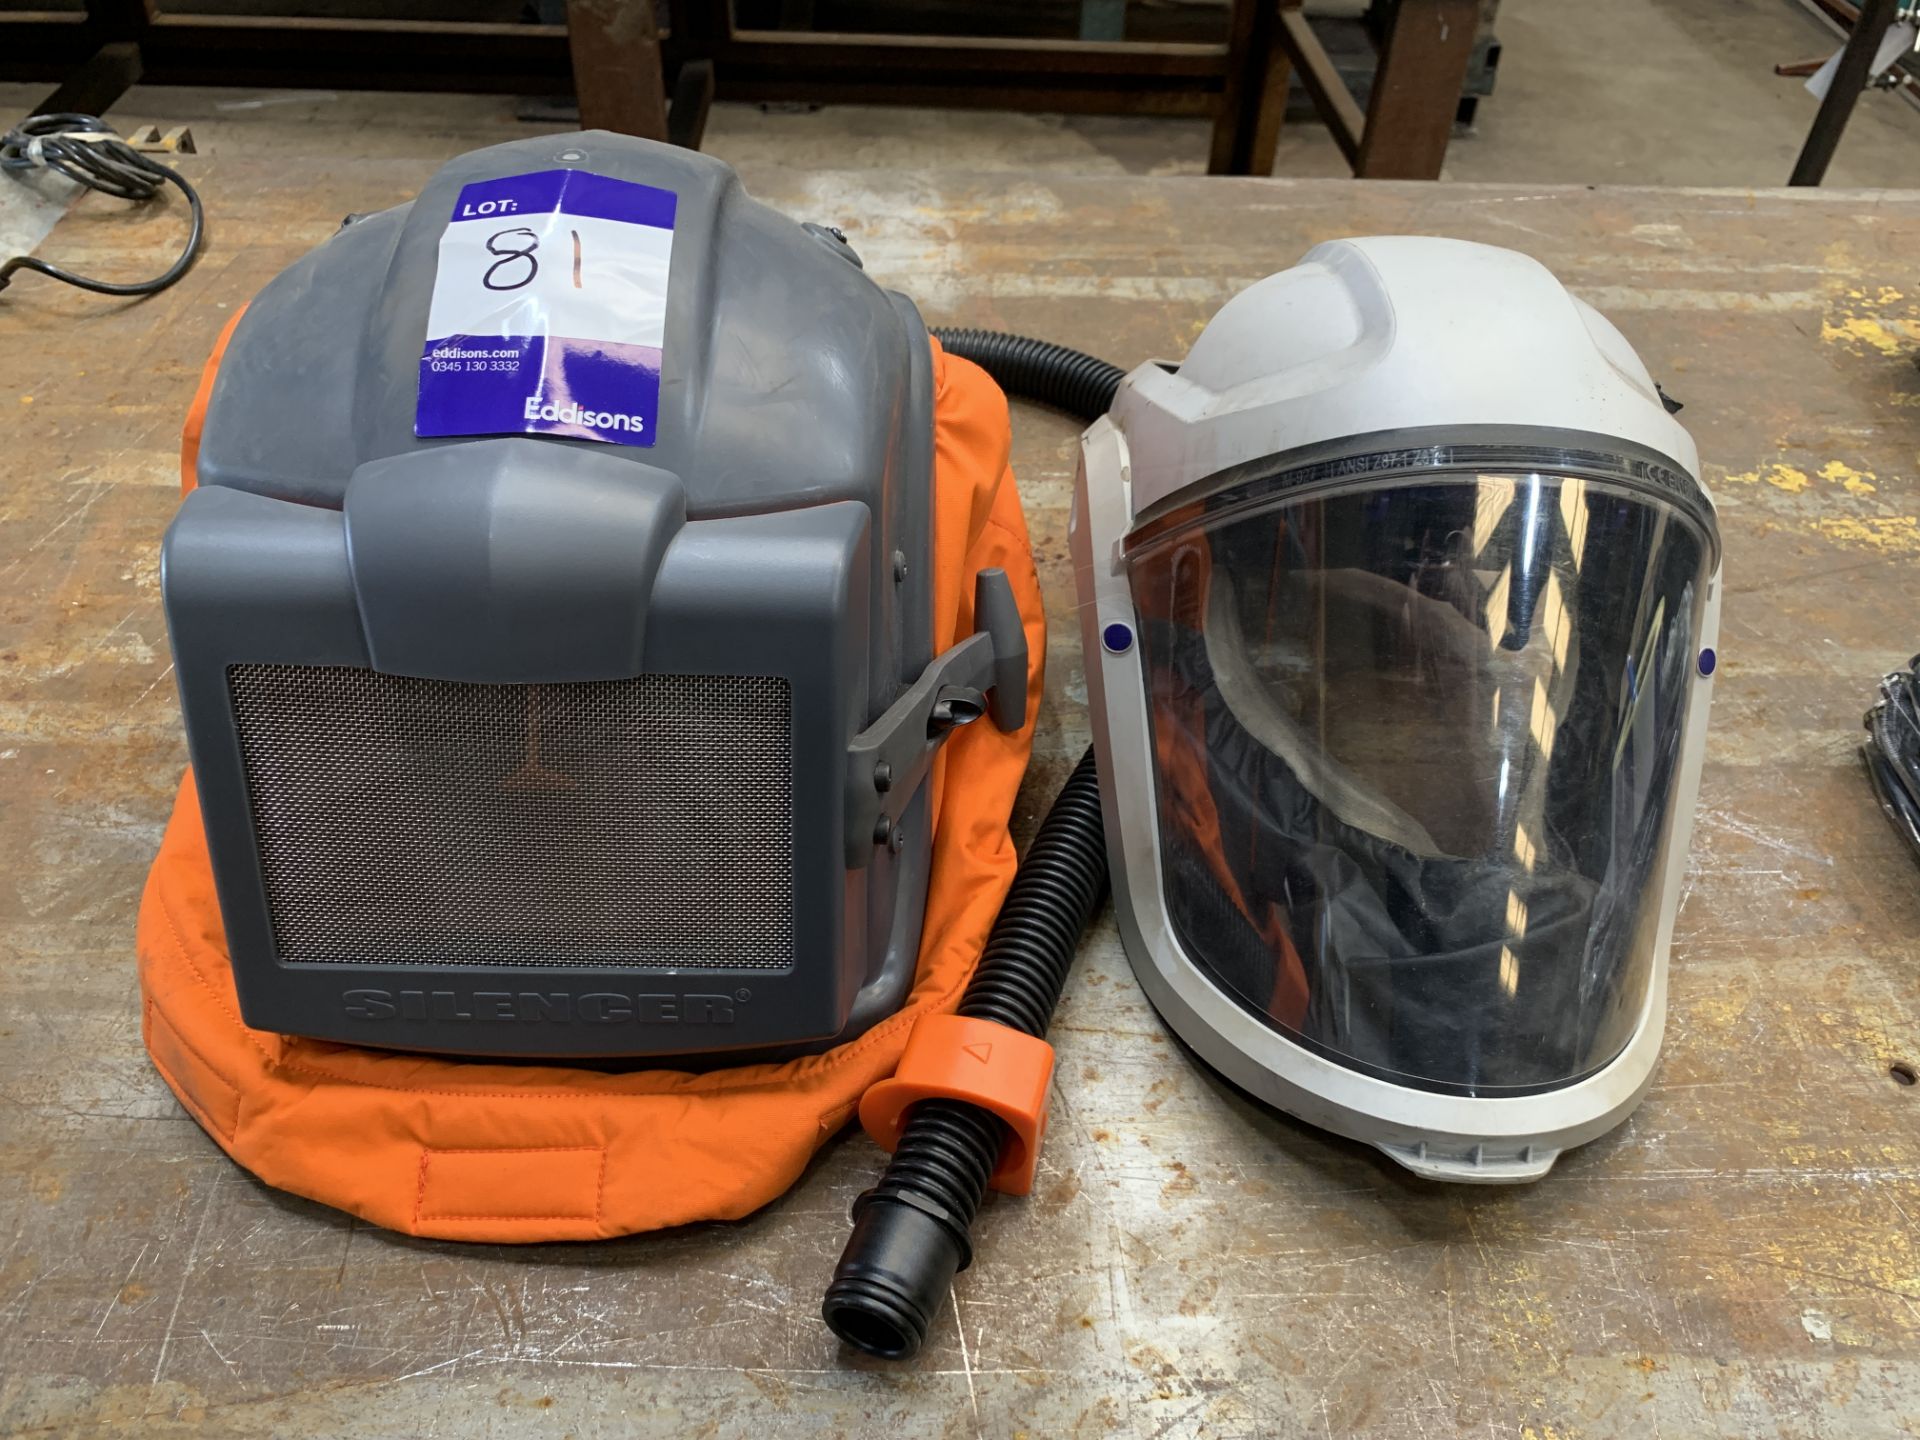 Silencer welding mask, with integrated ear defenders, and 3M welding mask